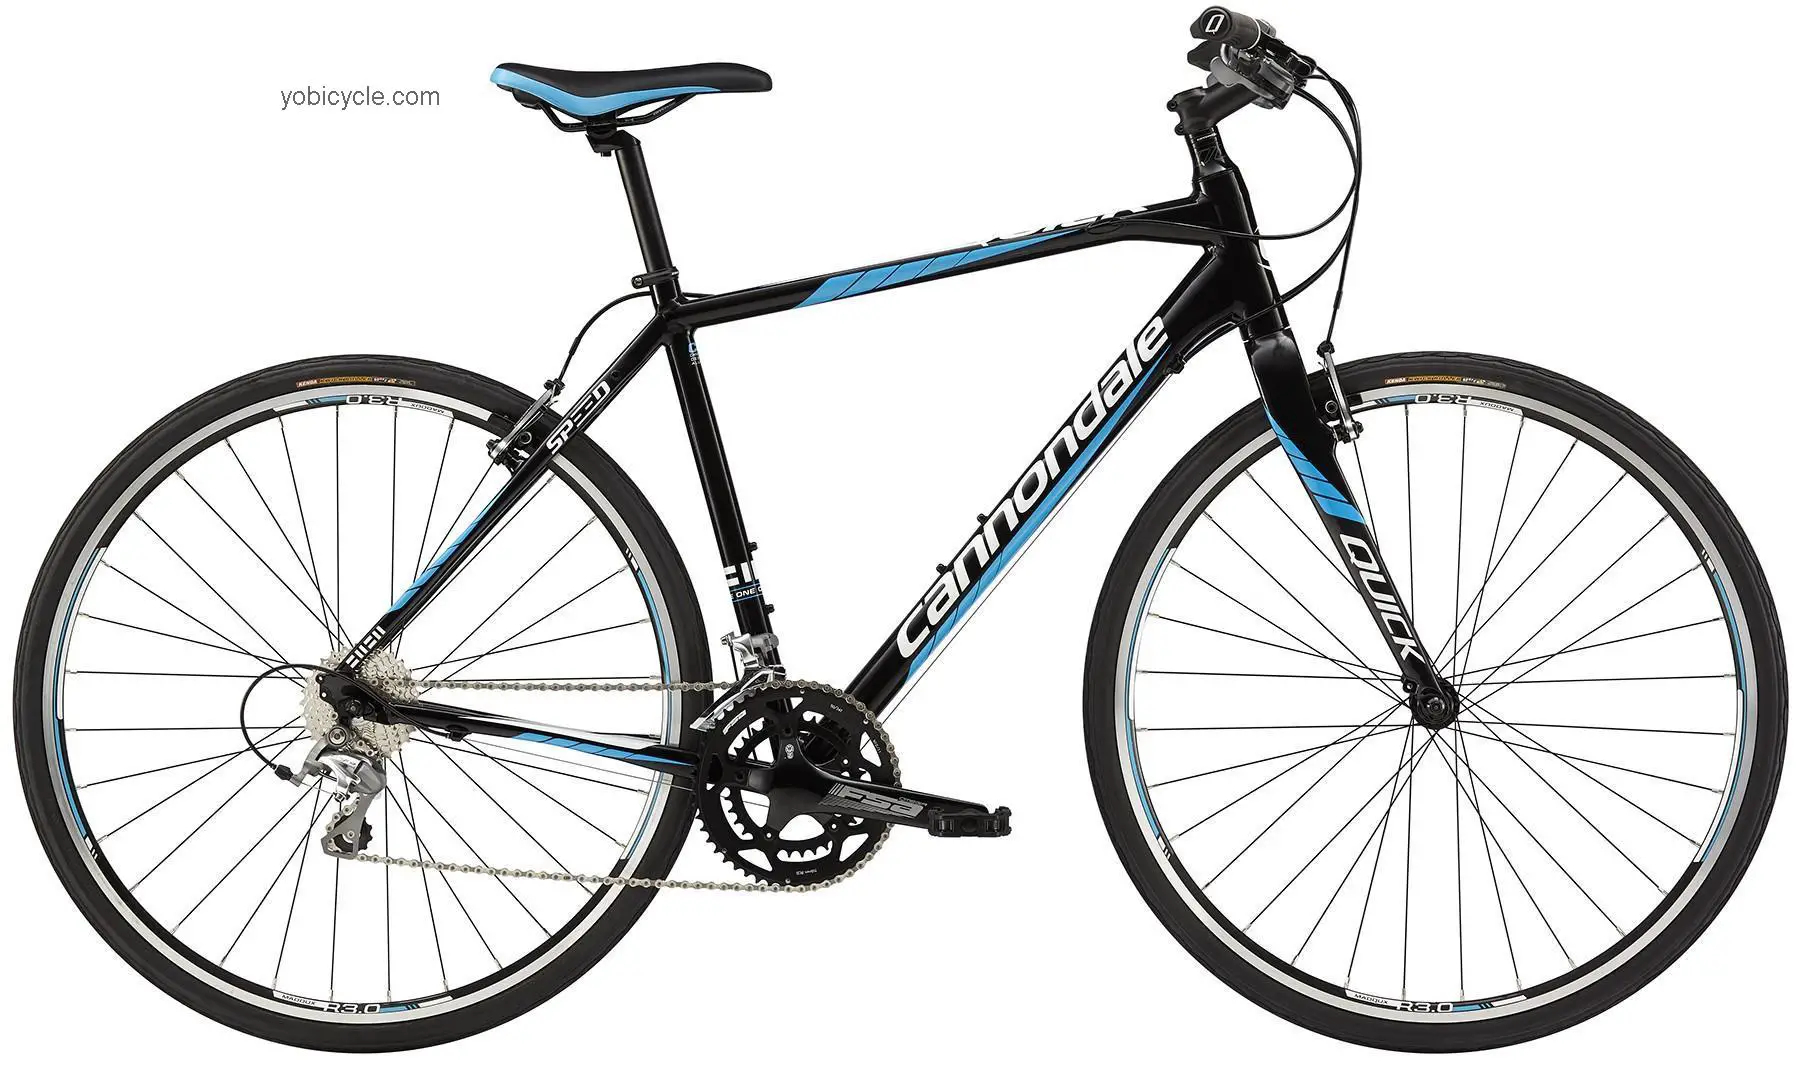 Cannondale QUICK SPEED 1 2015 comparison online with competitors